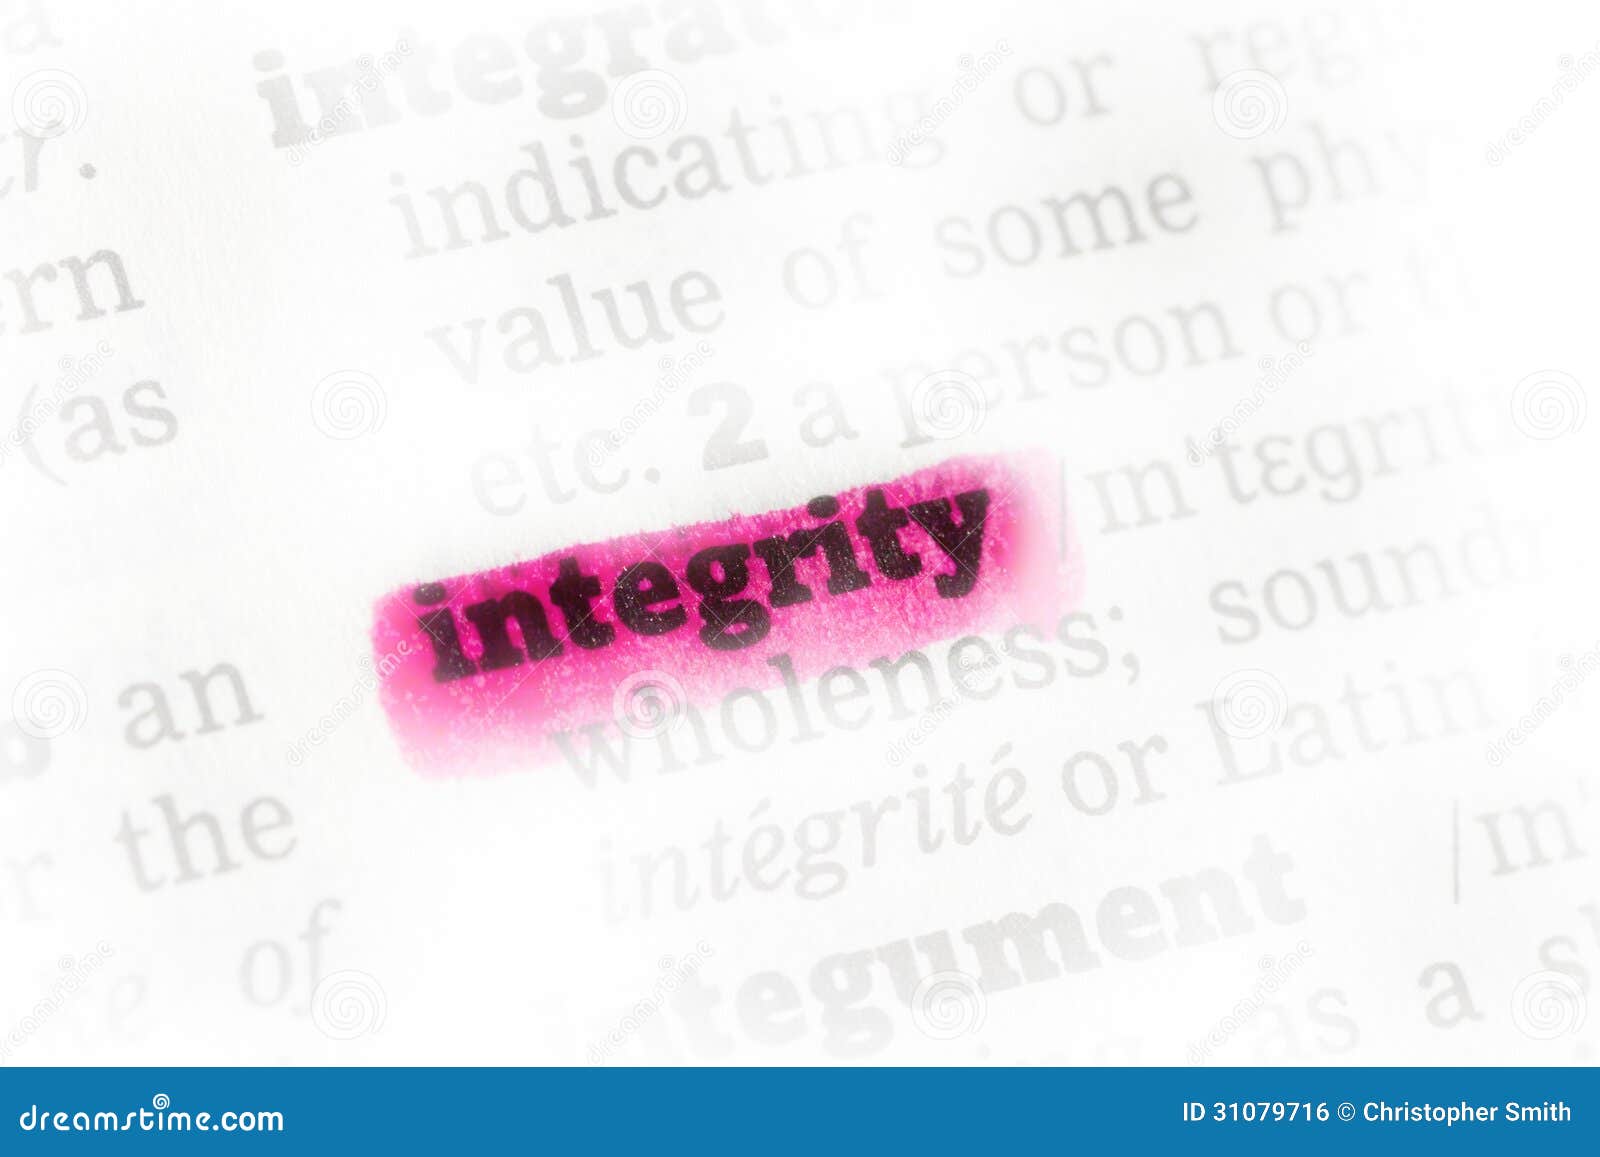 what does integrity mean to you essay